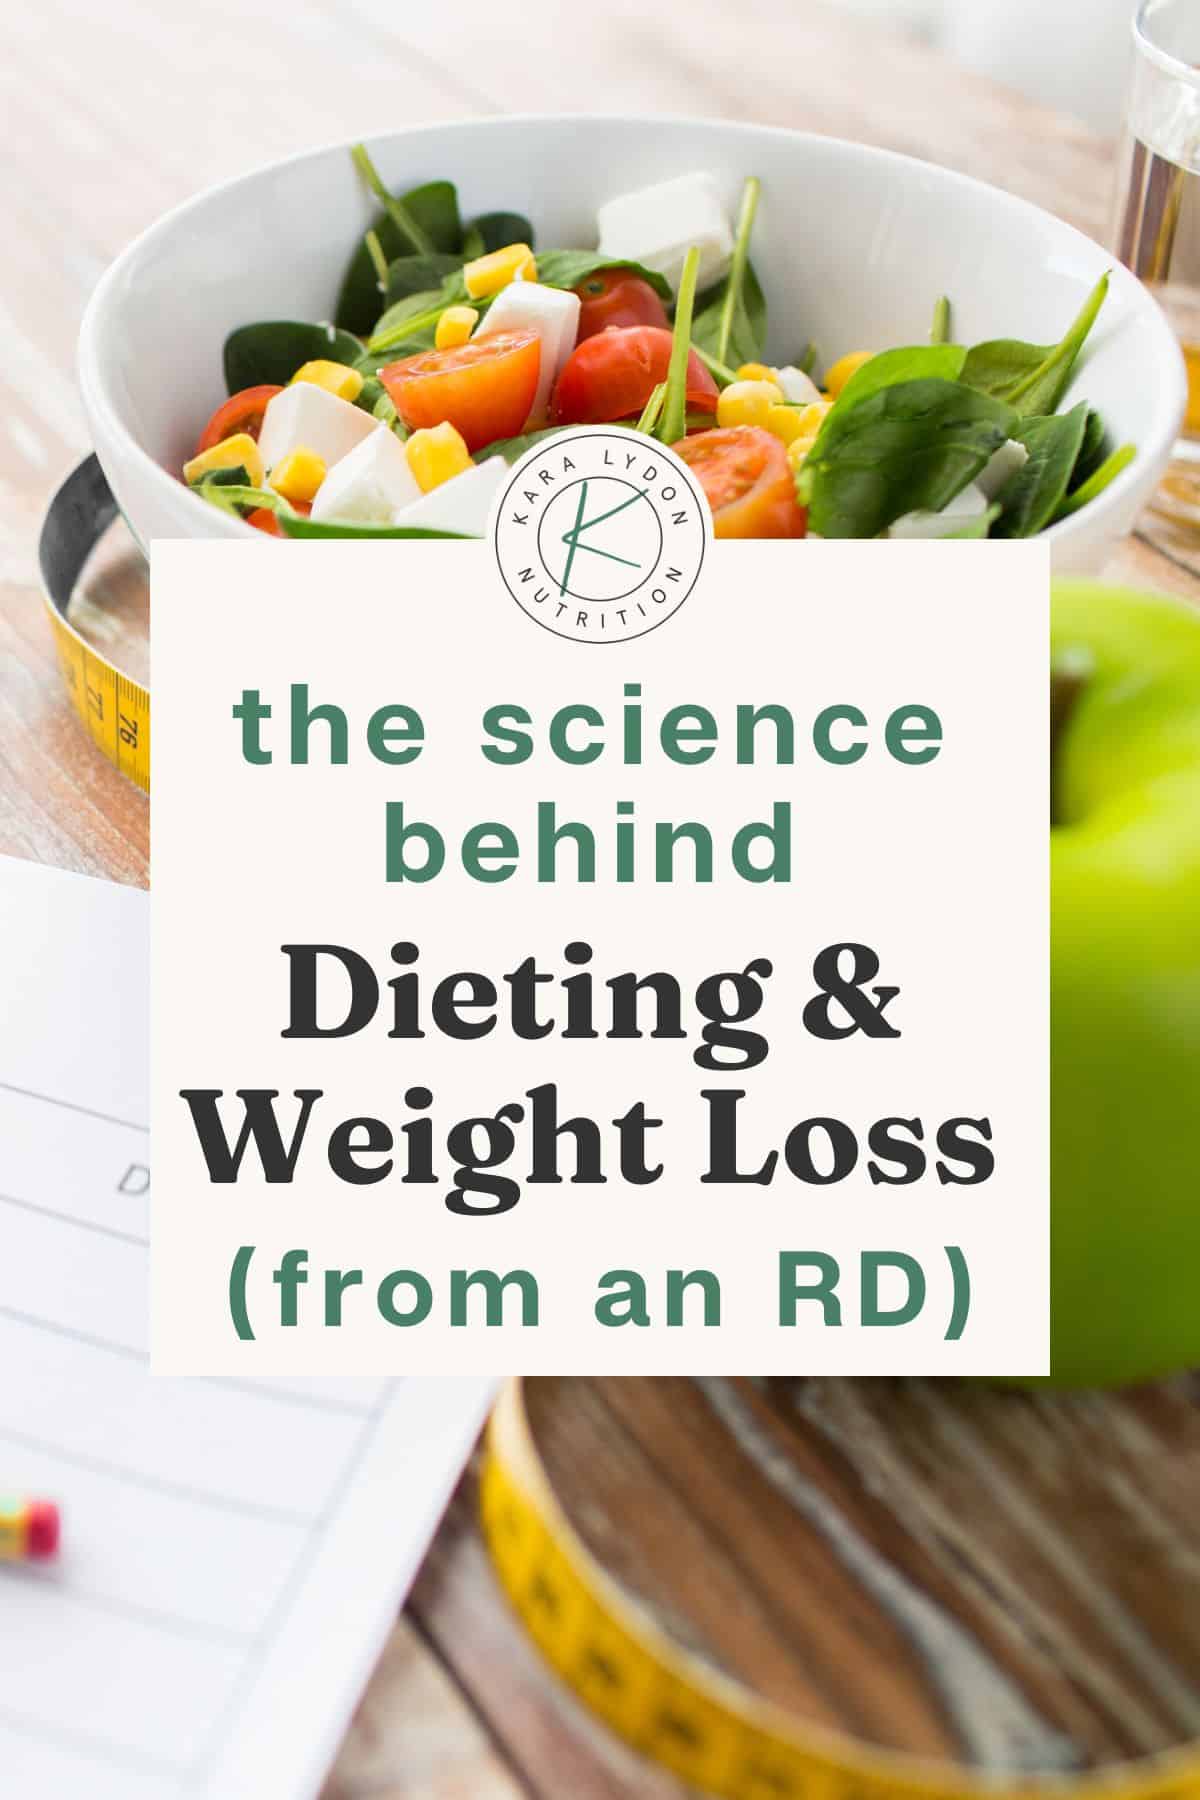 white salad bowl, green apple and measuring tape on wood table with text overlay the science behind dieting and weight loss (from an RD)